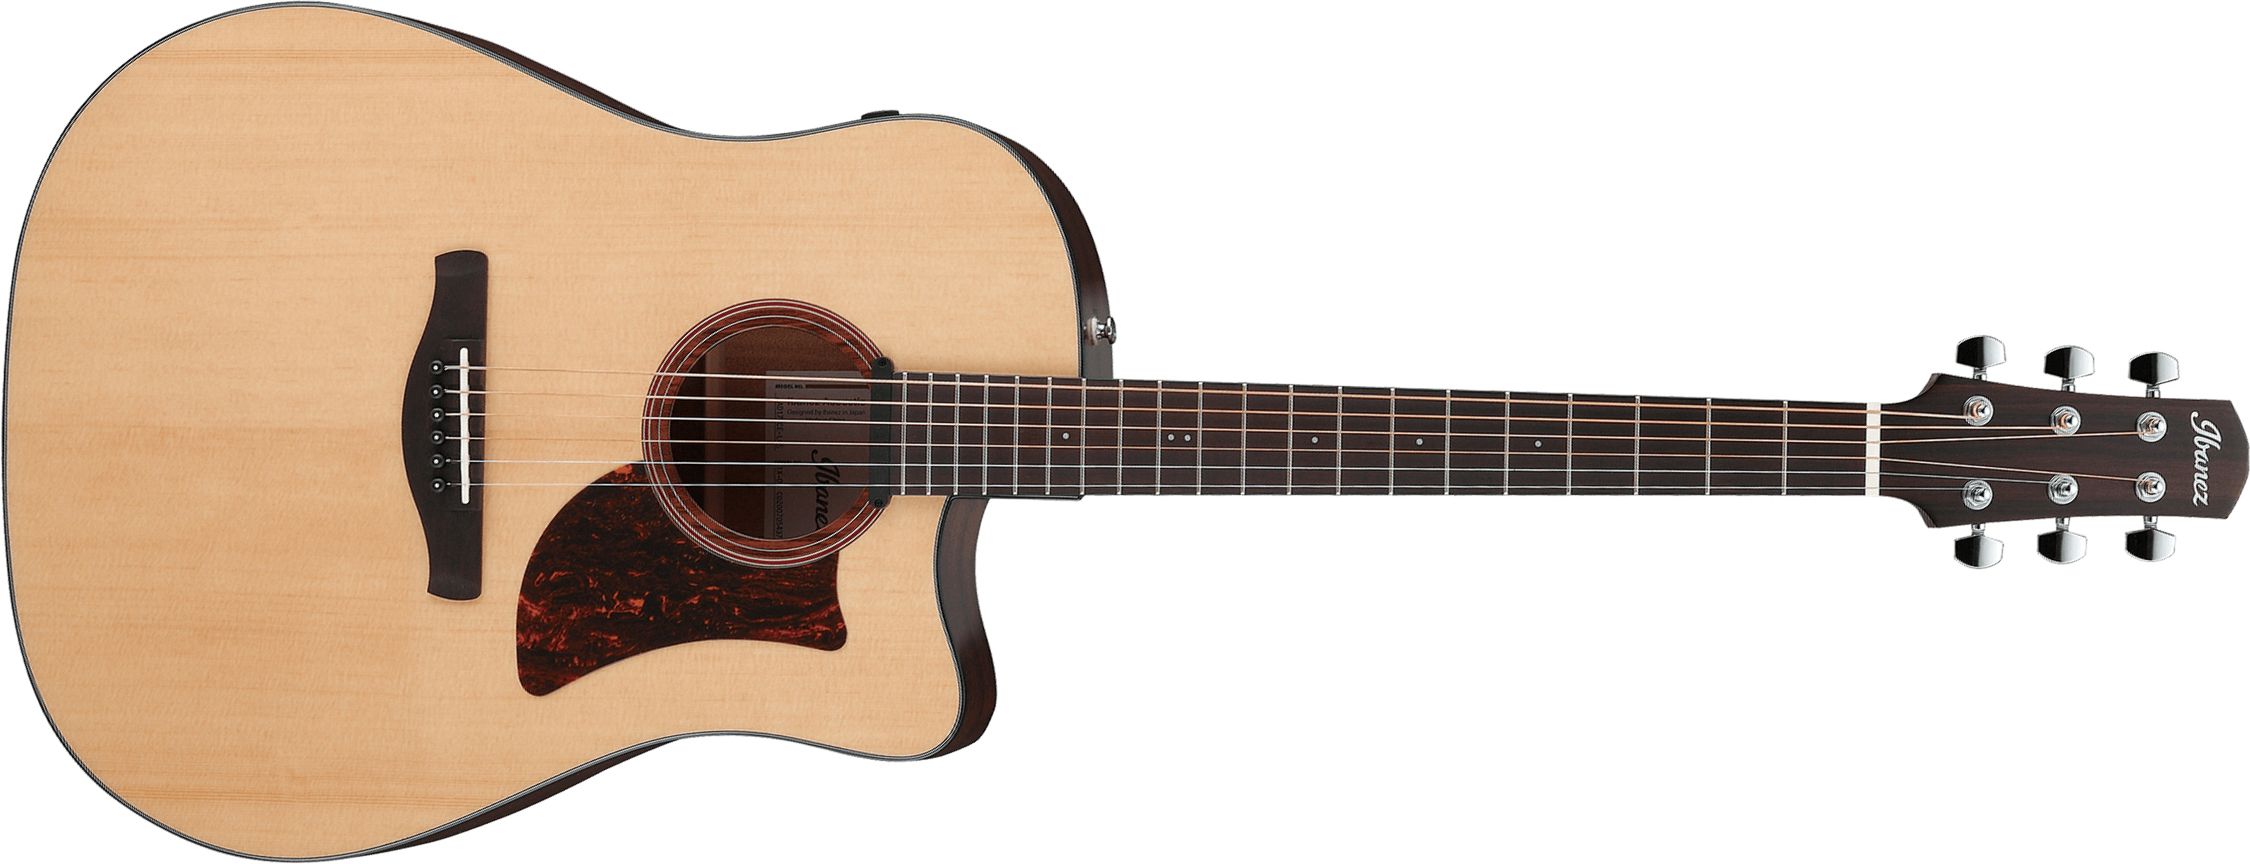 Ibanez Aad170ce Lgs Advanced Dreadnought Cw Epicea Okoume Ova - Natural Low Gloss - Electro acoustic guitar - Main picture